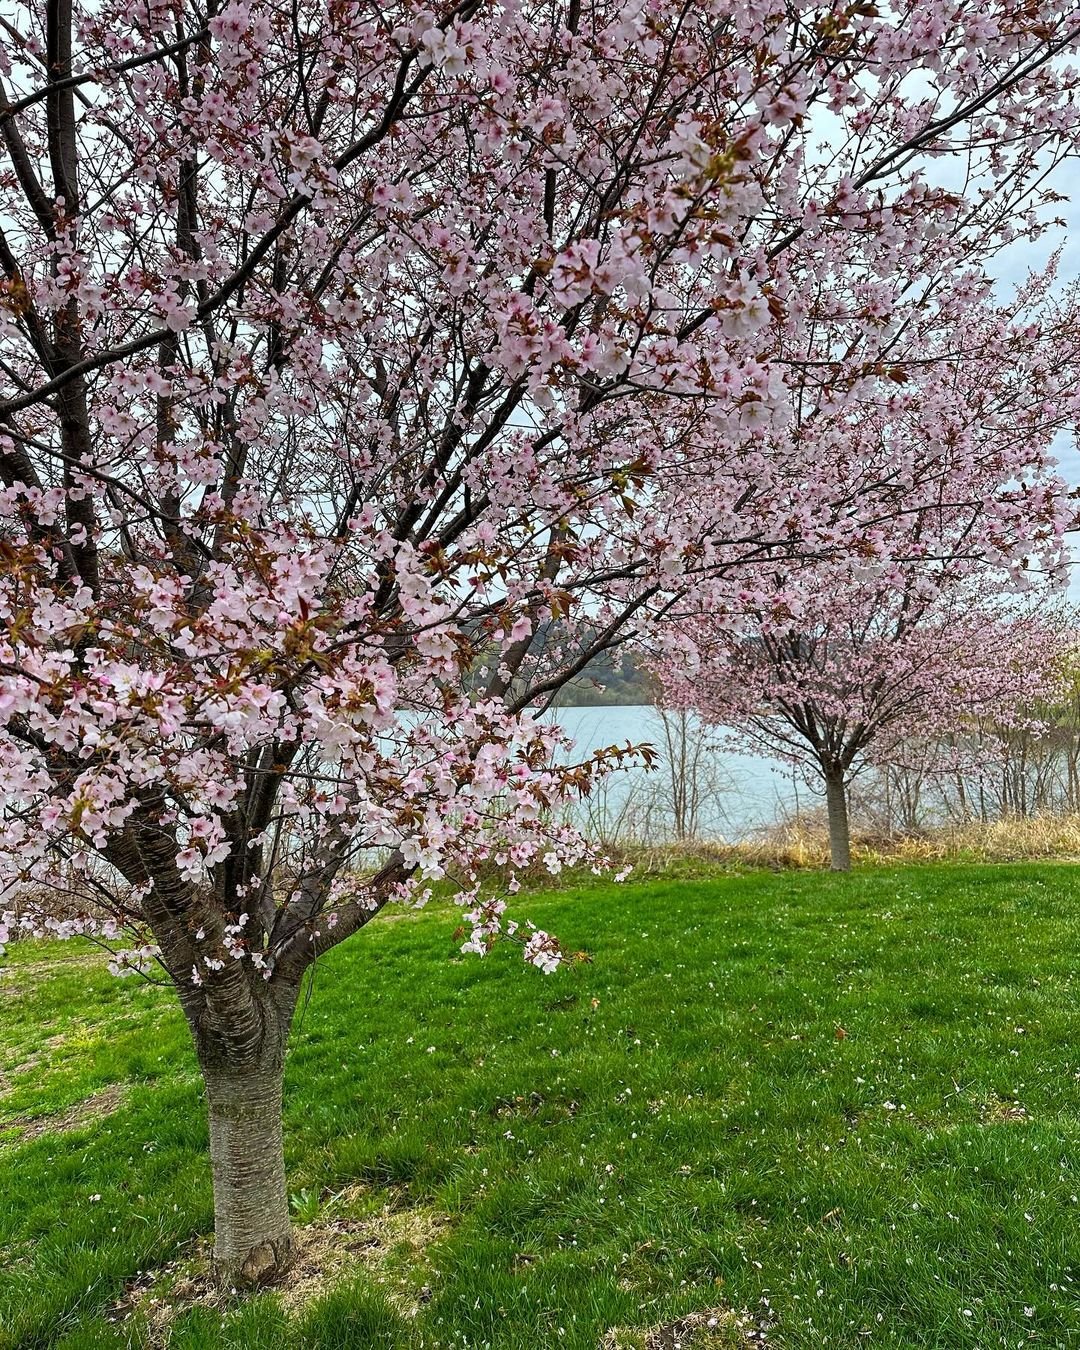 Cherry blossoms in bloom at the Washington Monument with a cherry tree in the foreground.